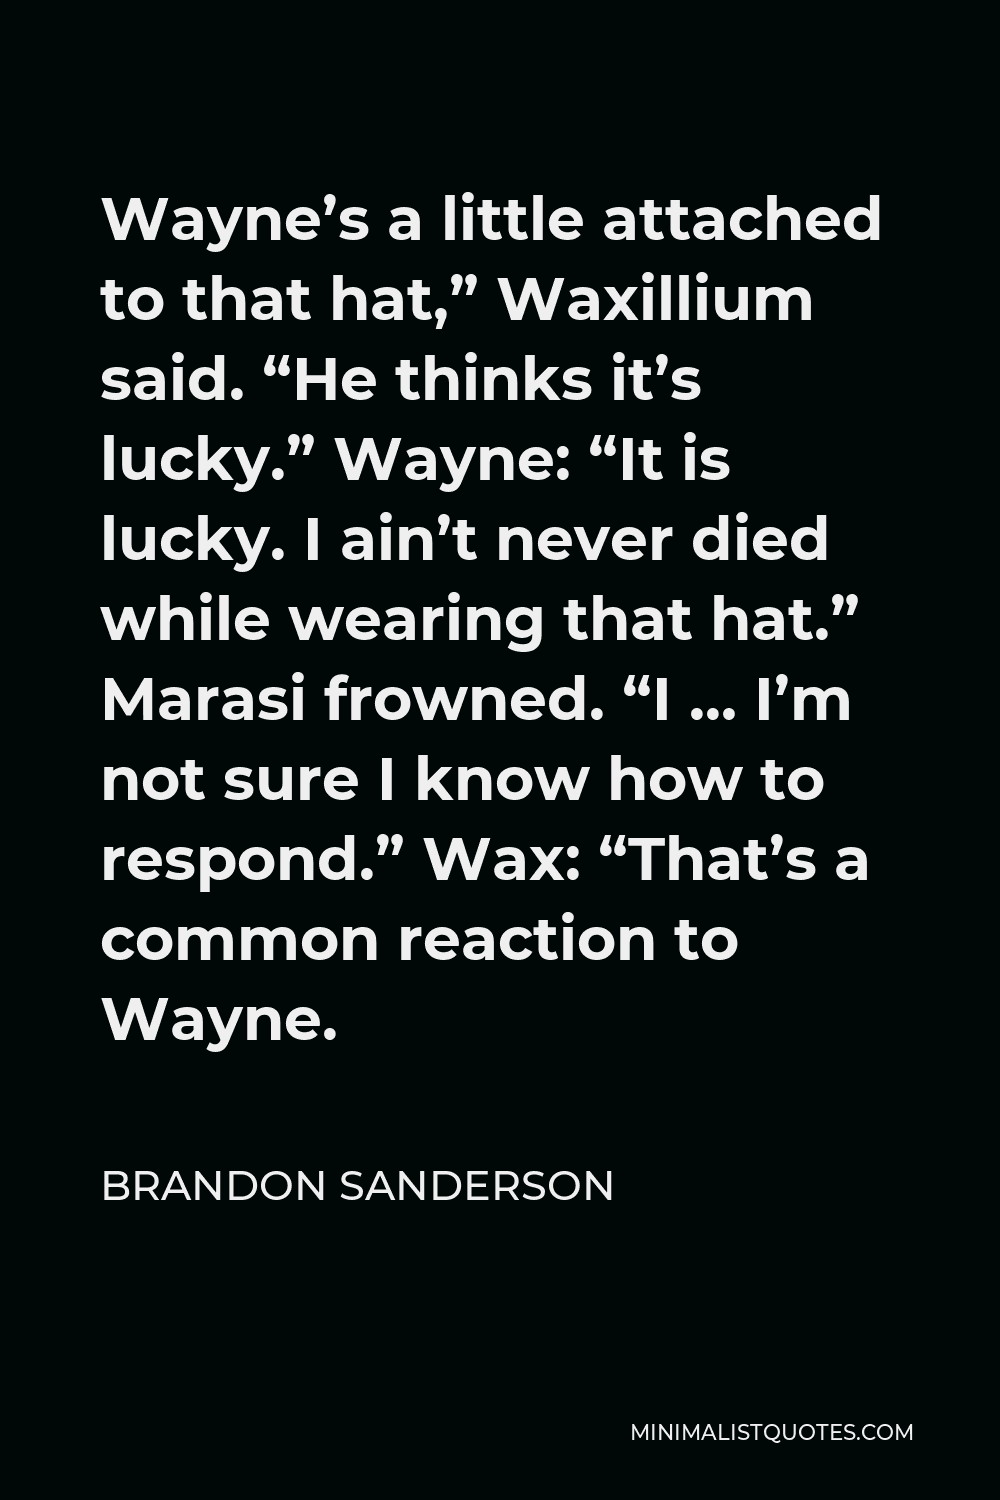 Brandon Sanderson Quote - Wayne’s a little attached to that hat,” Waxillium said. “He thinks it’s lucky.” Wayne: “It is lucky. I ain’t never died while wearing that hat.” Marasi frowned. “I … I’m not sure I know how to respond.” Wax: “That’s a common reaction to Wayne.